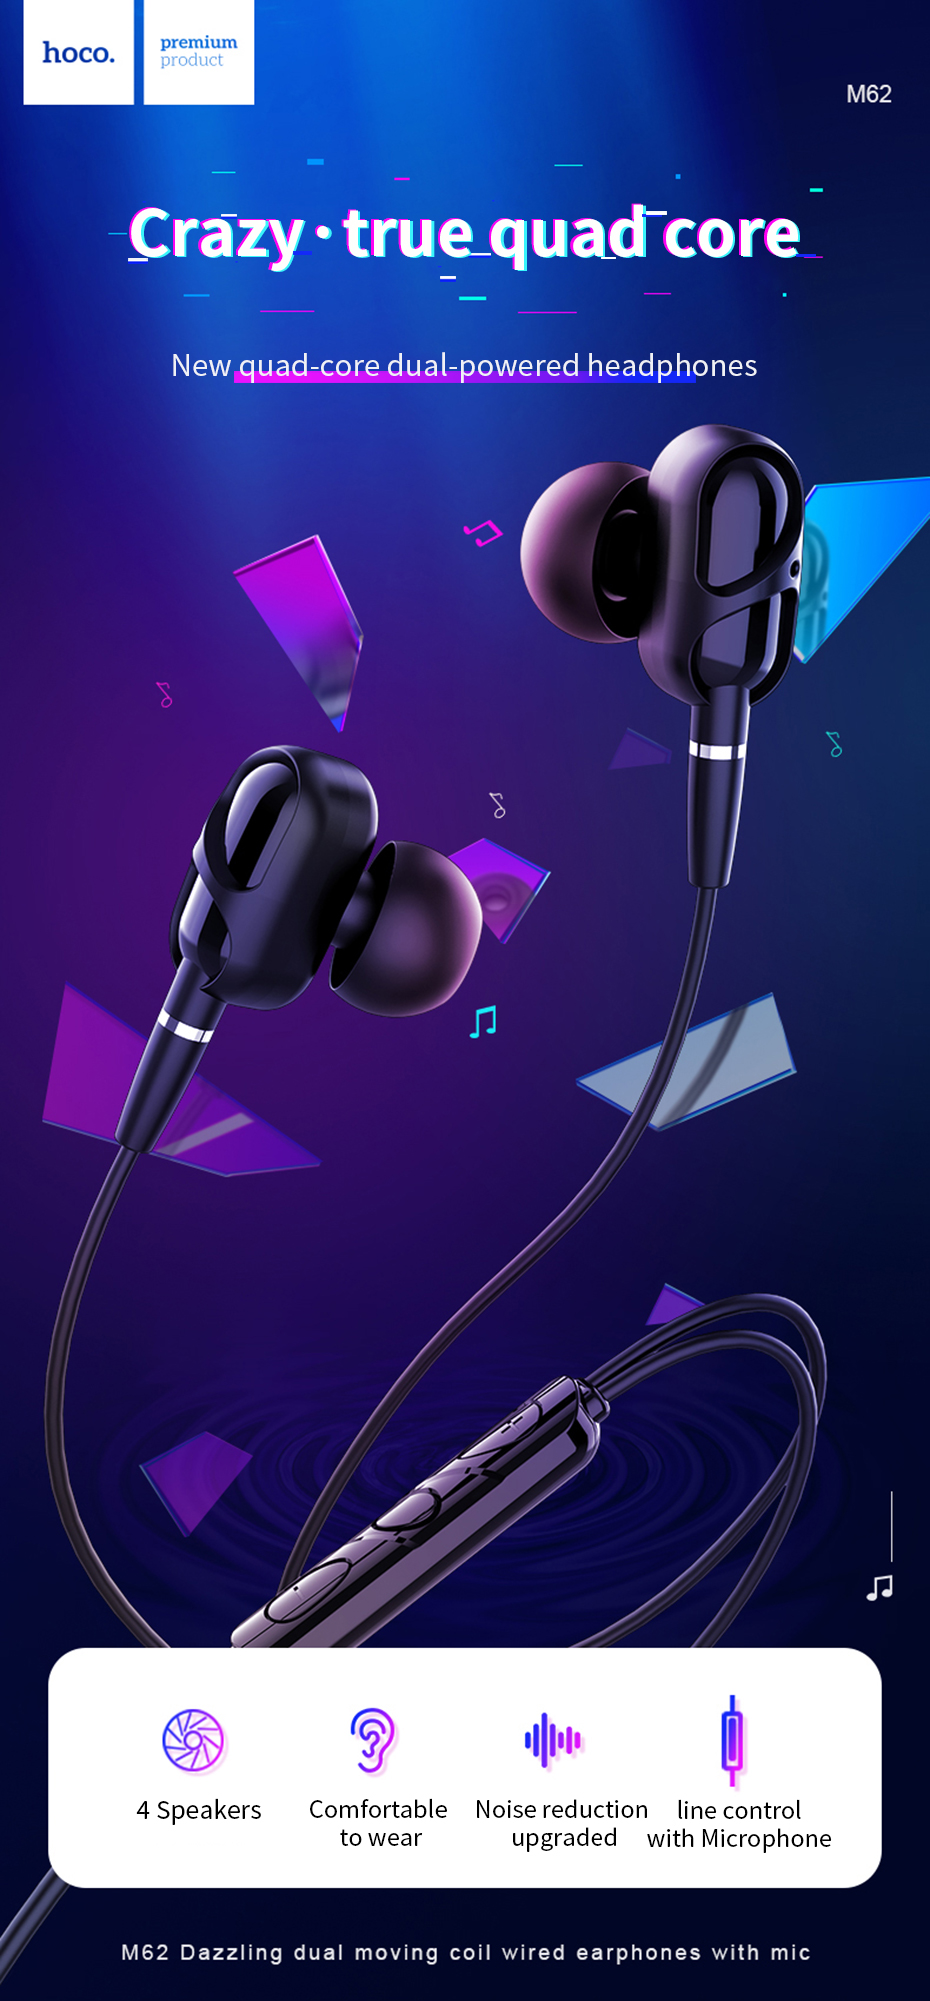 HOCO-M62-35mm-In-ear-Stereo-Earphone-Dual-Drive-Headphones-with-Mic-for-iPhone-Samsung-1556472-1